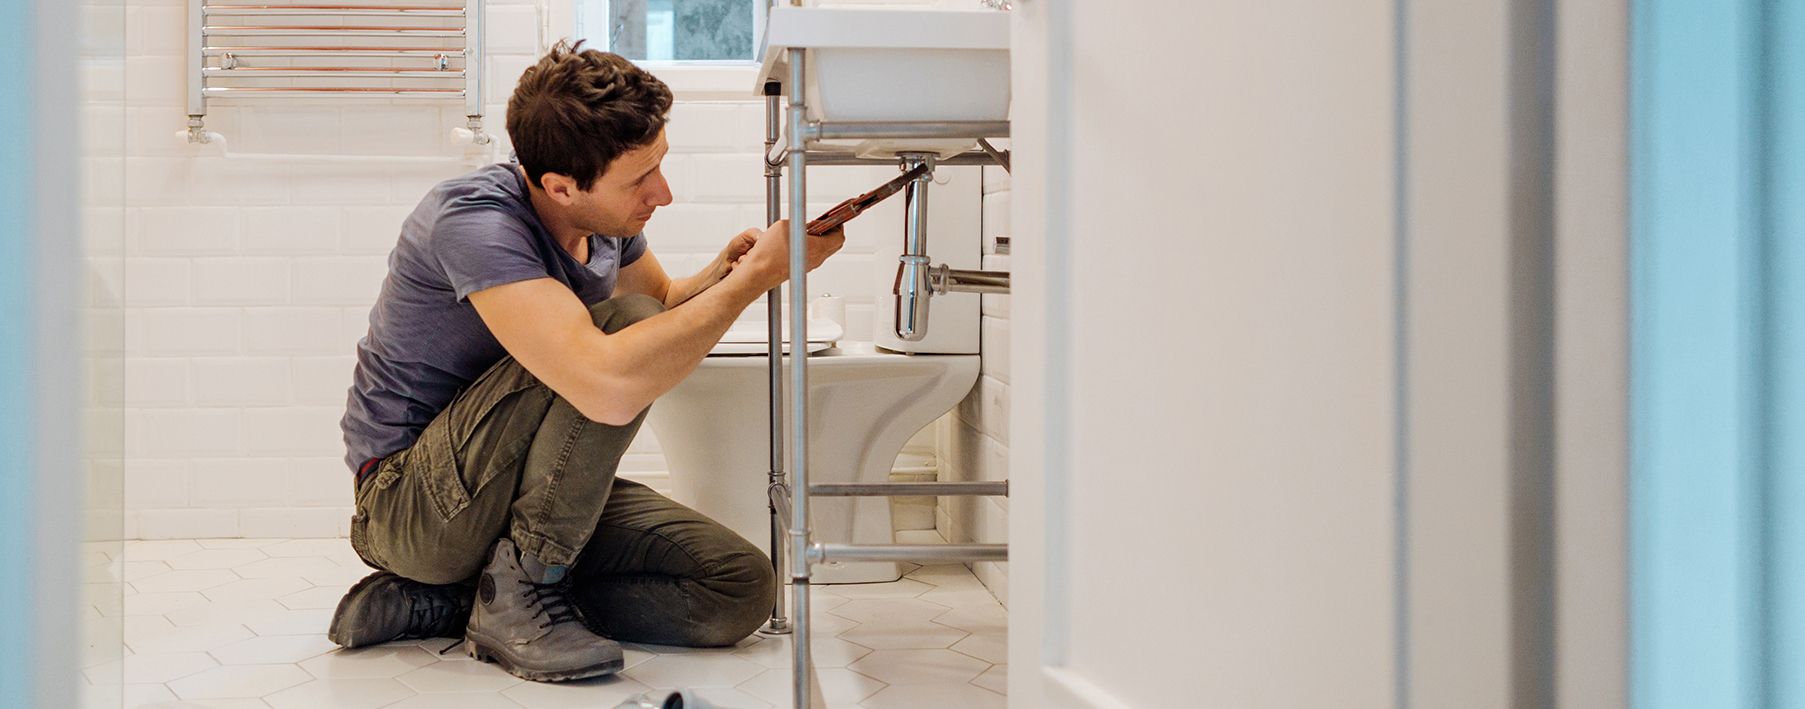 man kneeling at a sink, using a tool on the pipes